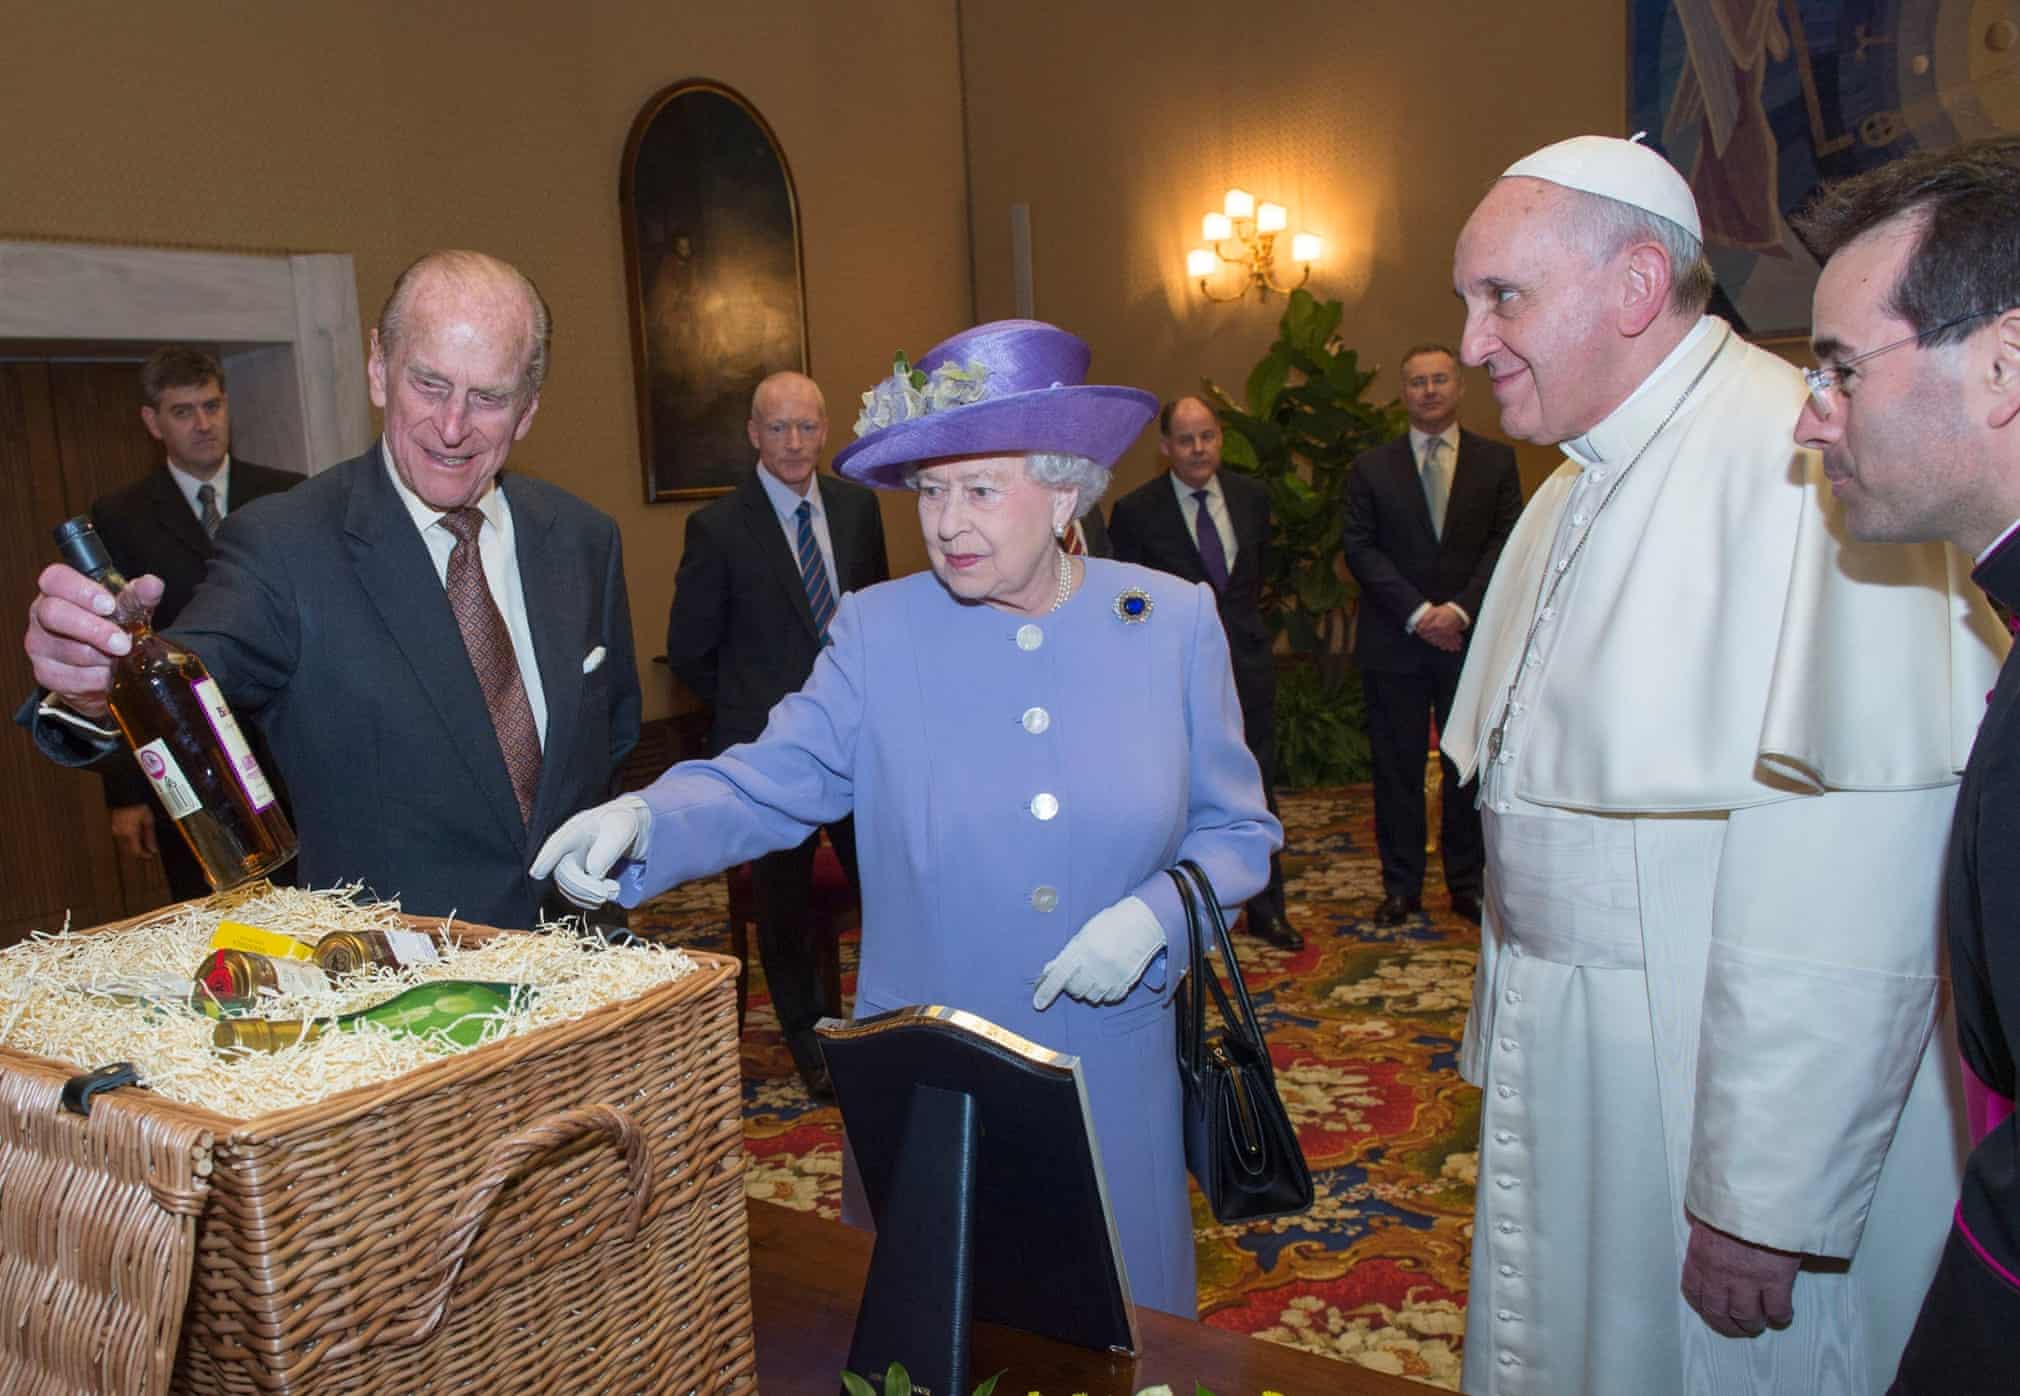 The royal couple look at a gift from Pope Francis during their visit to the Vatican in April 2014. Photograph: Arthur Edwards/The Sun/PA